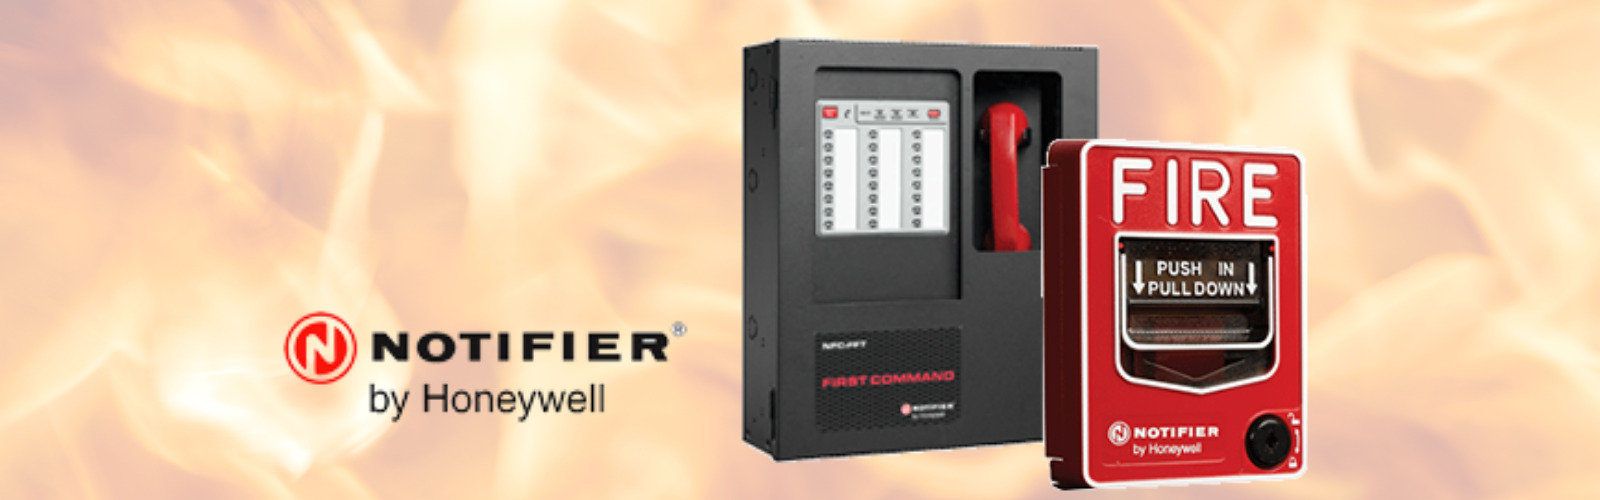 Notifier Fire Detection Products